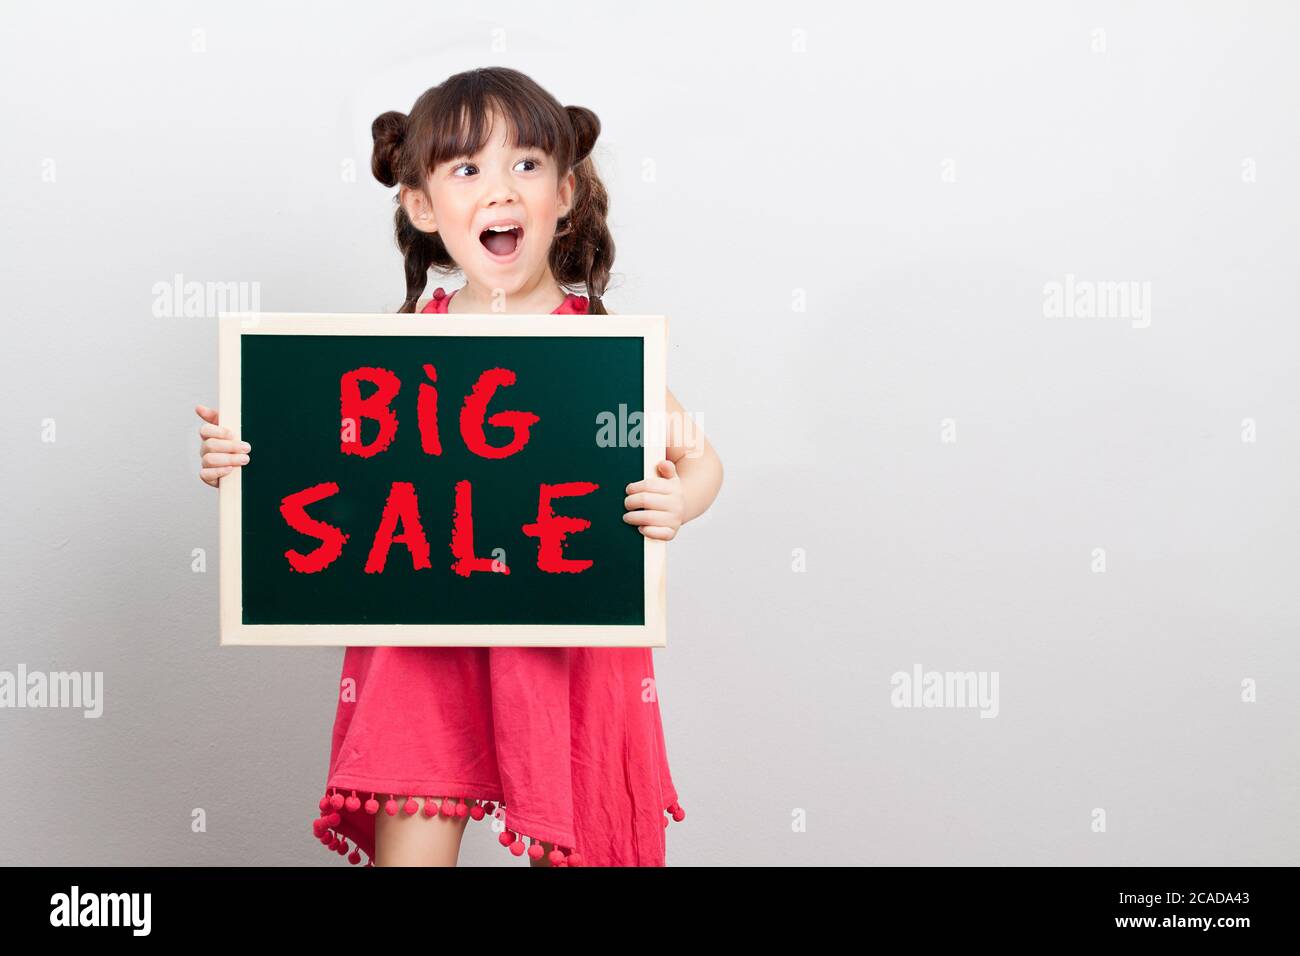 big sale discount for item in shopping mall promotion on end of year concept : adorable girl act surprise face holding chalk sign board , big sale Stock Photo